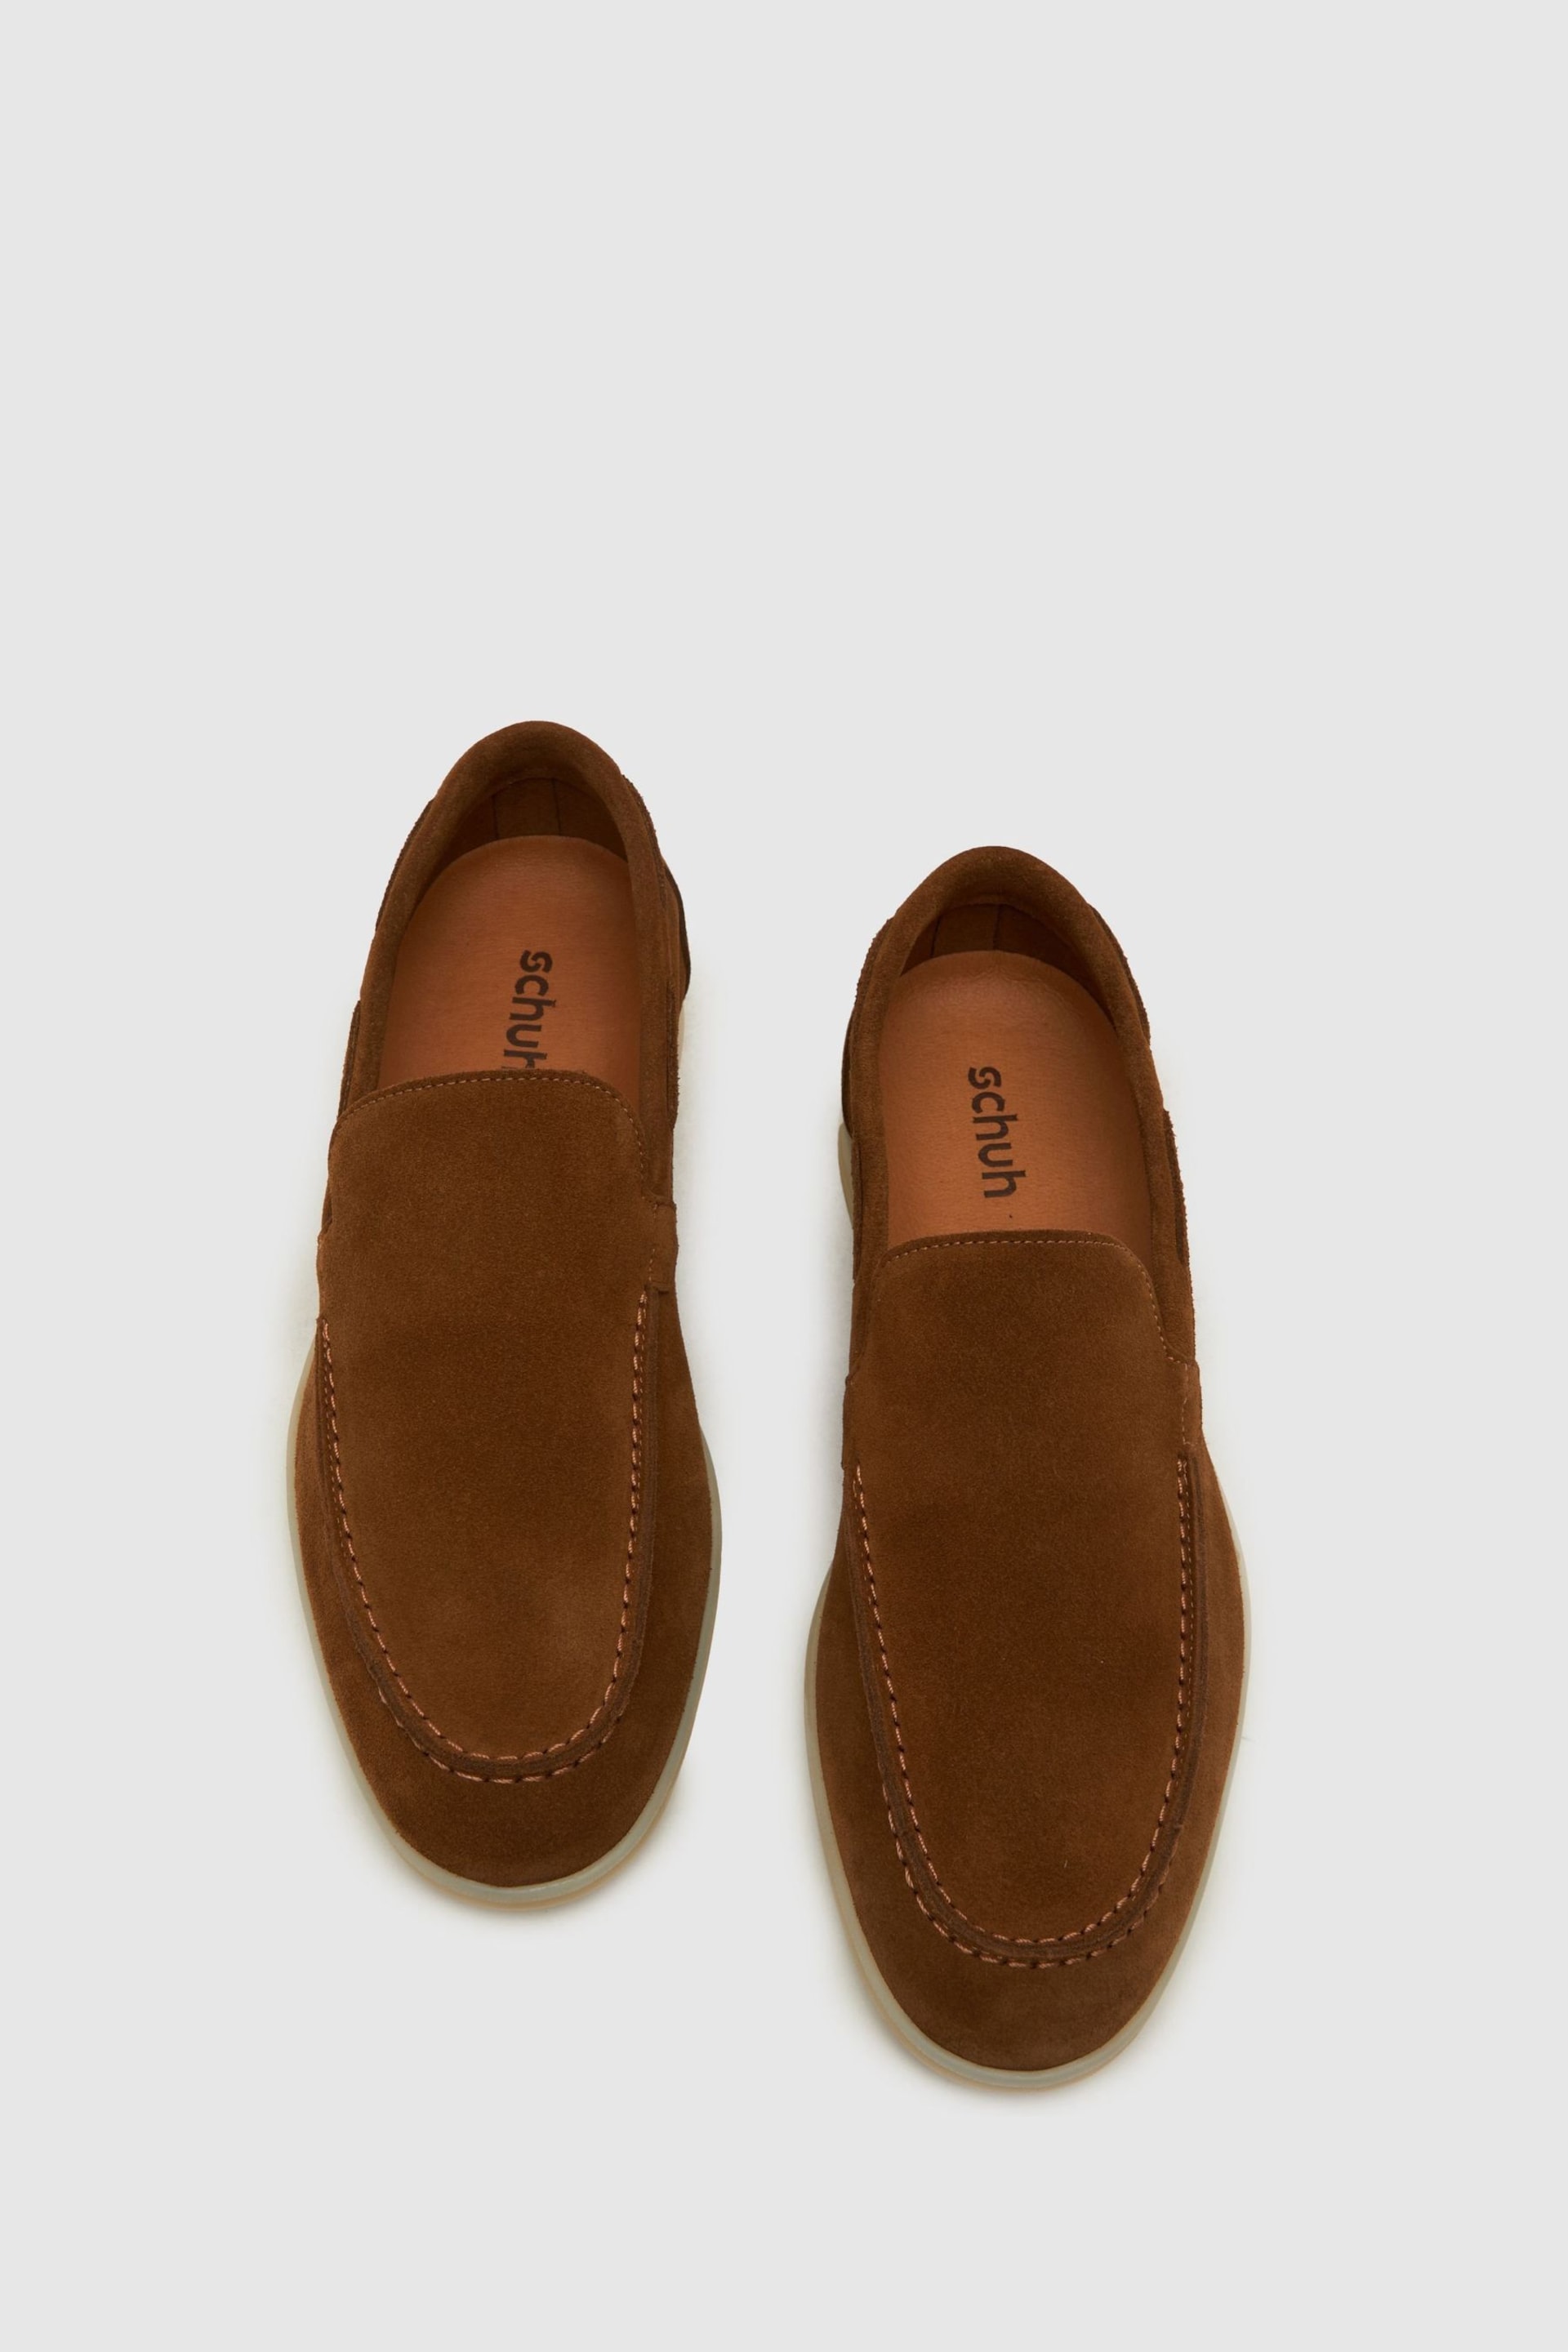 Schuh Phillip Suede Loafers - Image 4 of 4